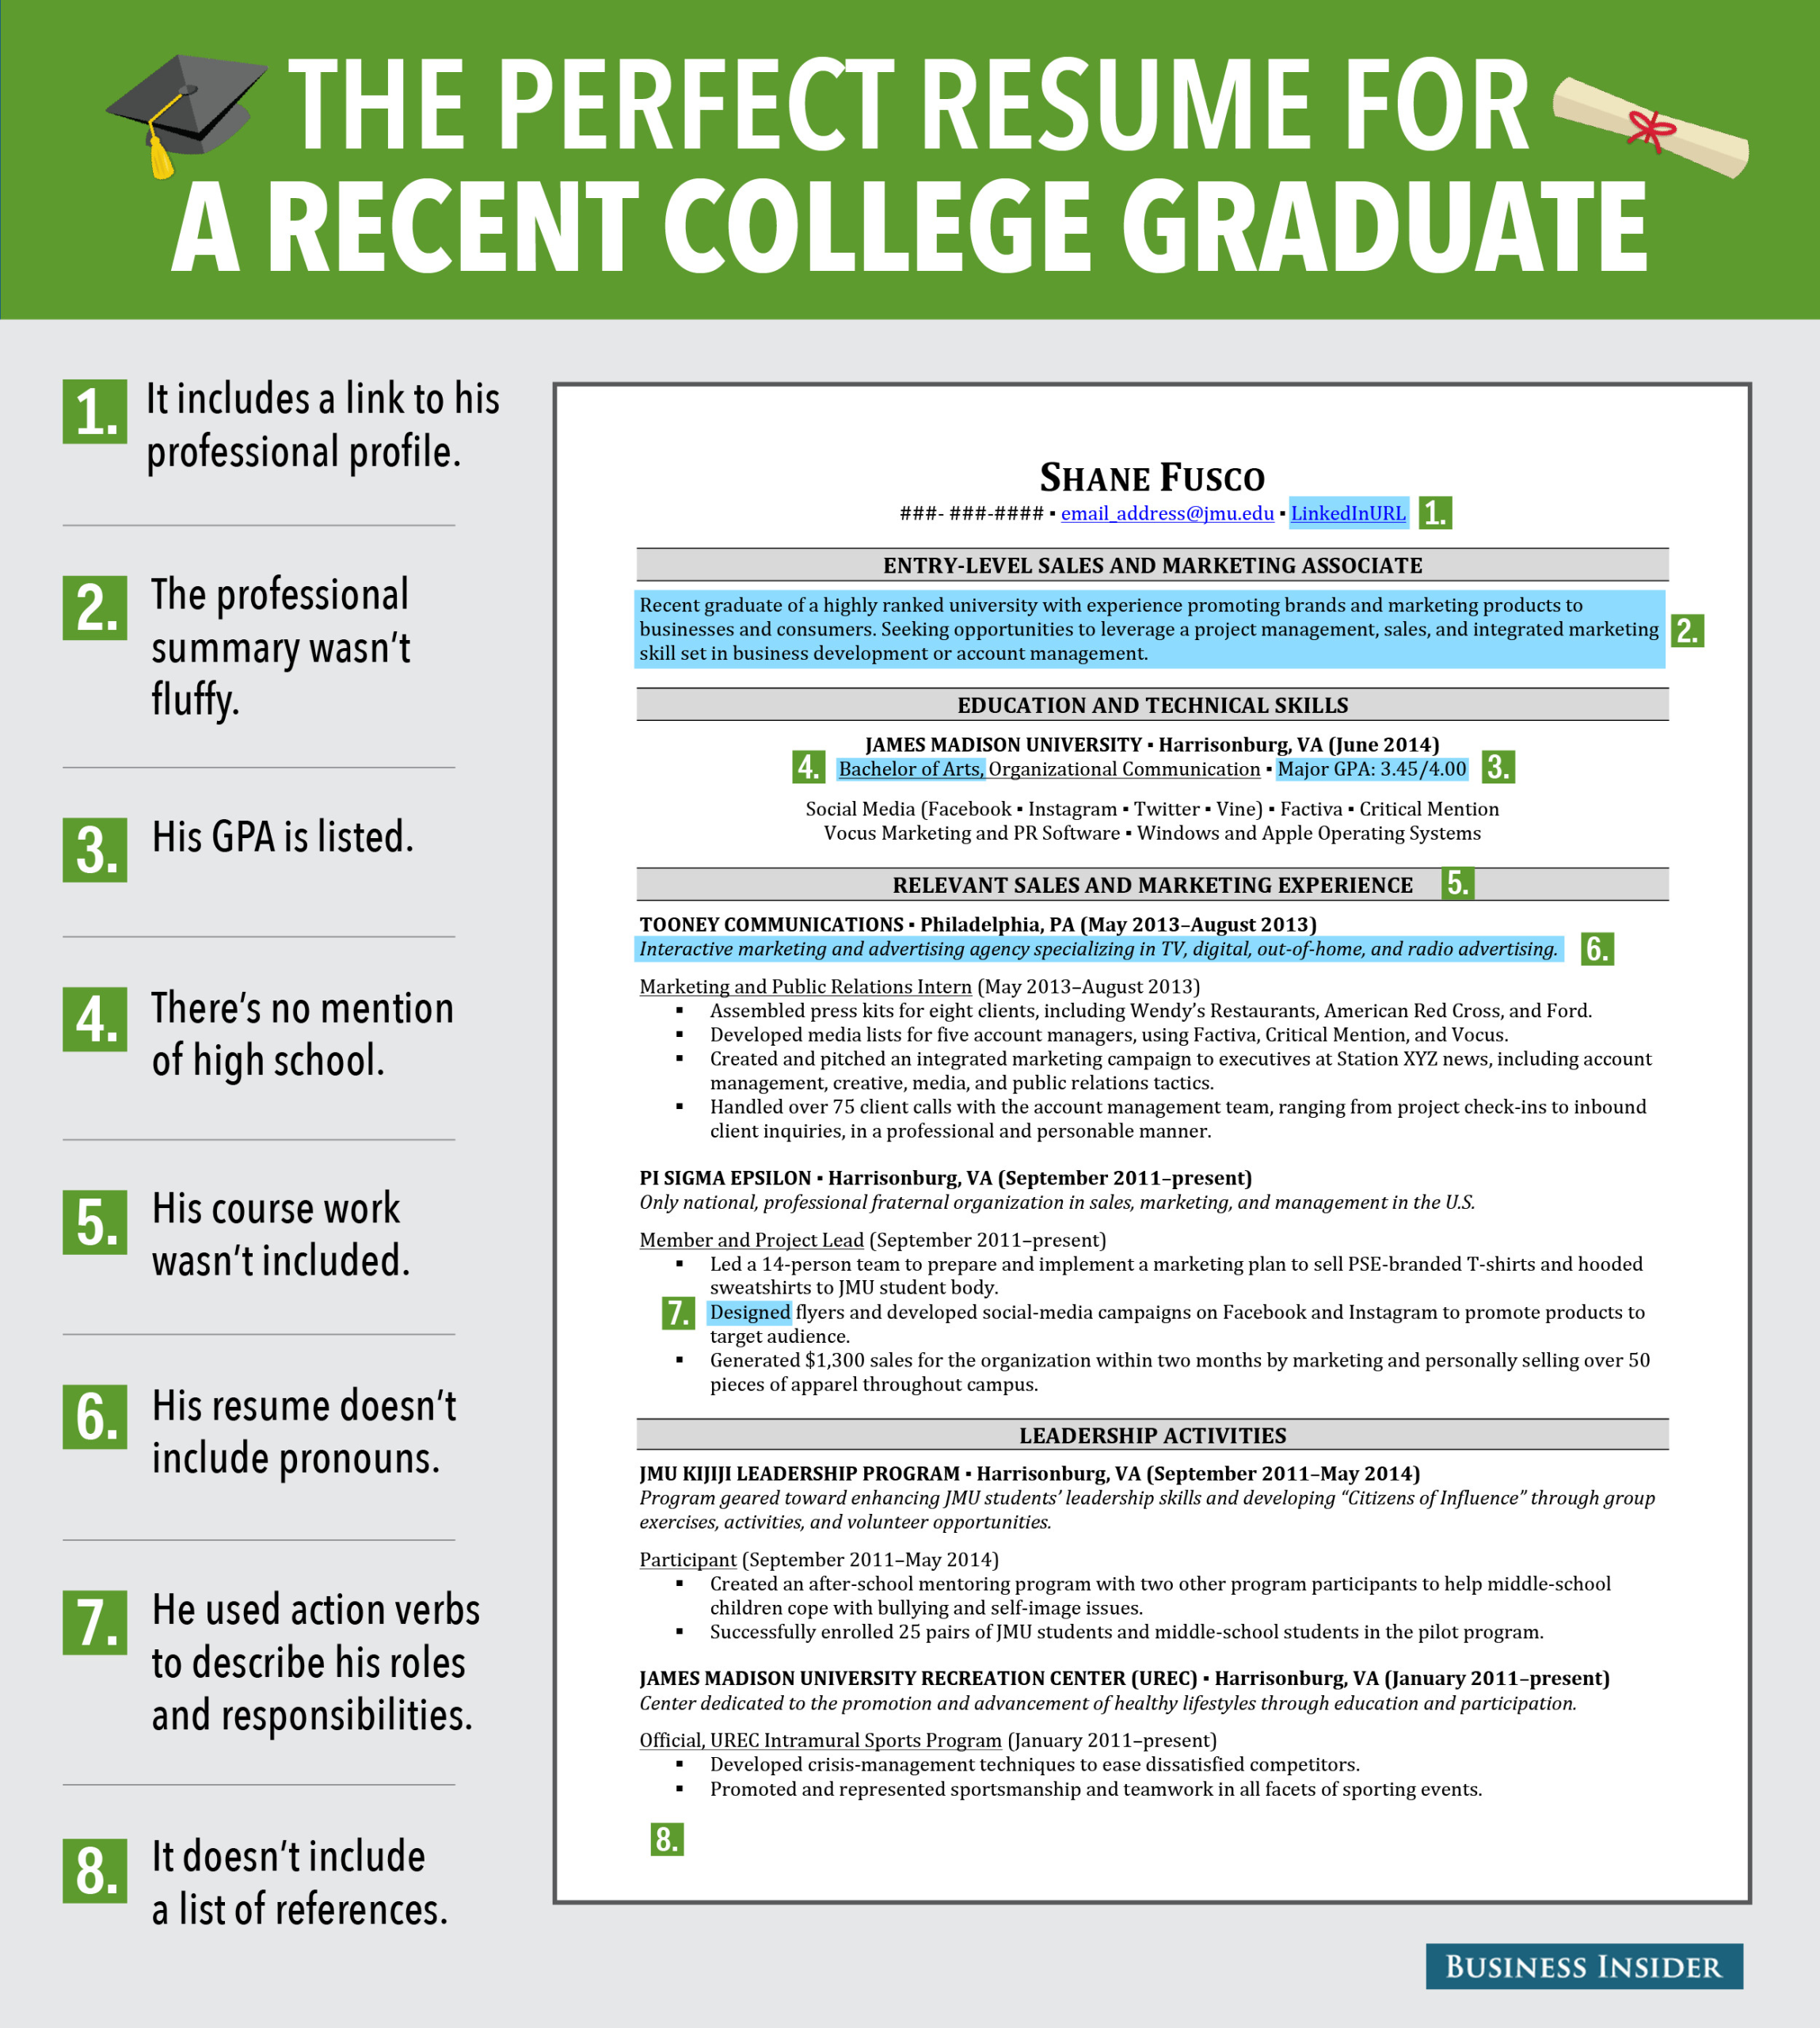 Best Sample Of Resume for Fresh Graduate 8 Reasons This is An Excellent Resume for A Recent College